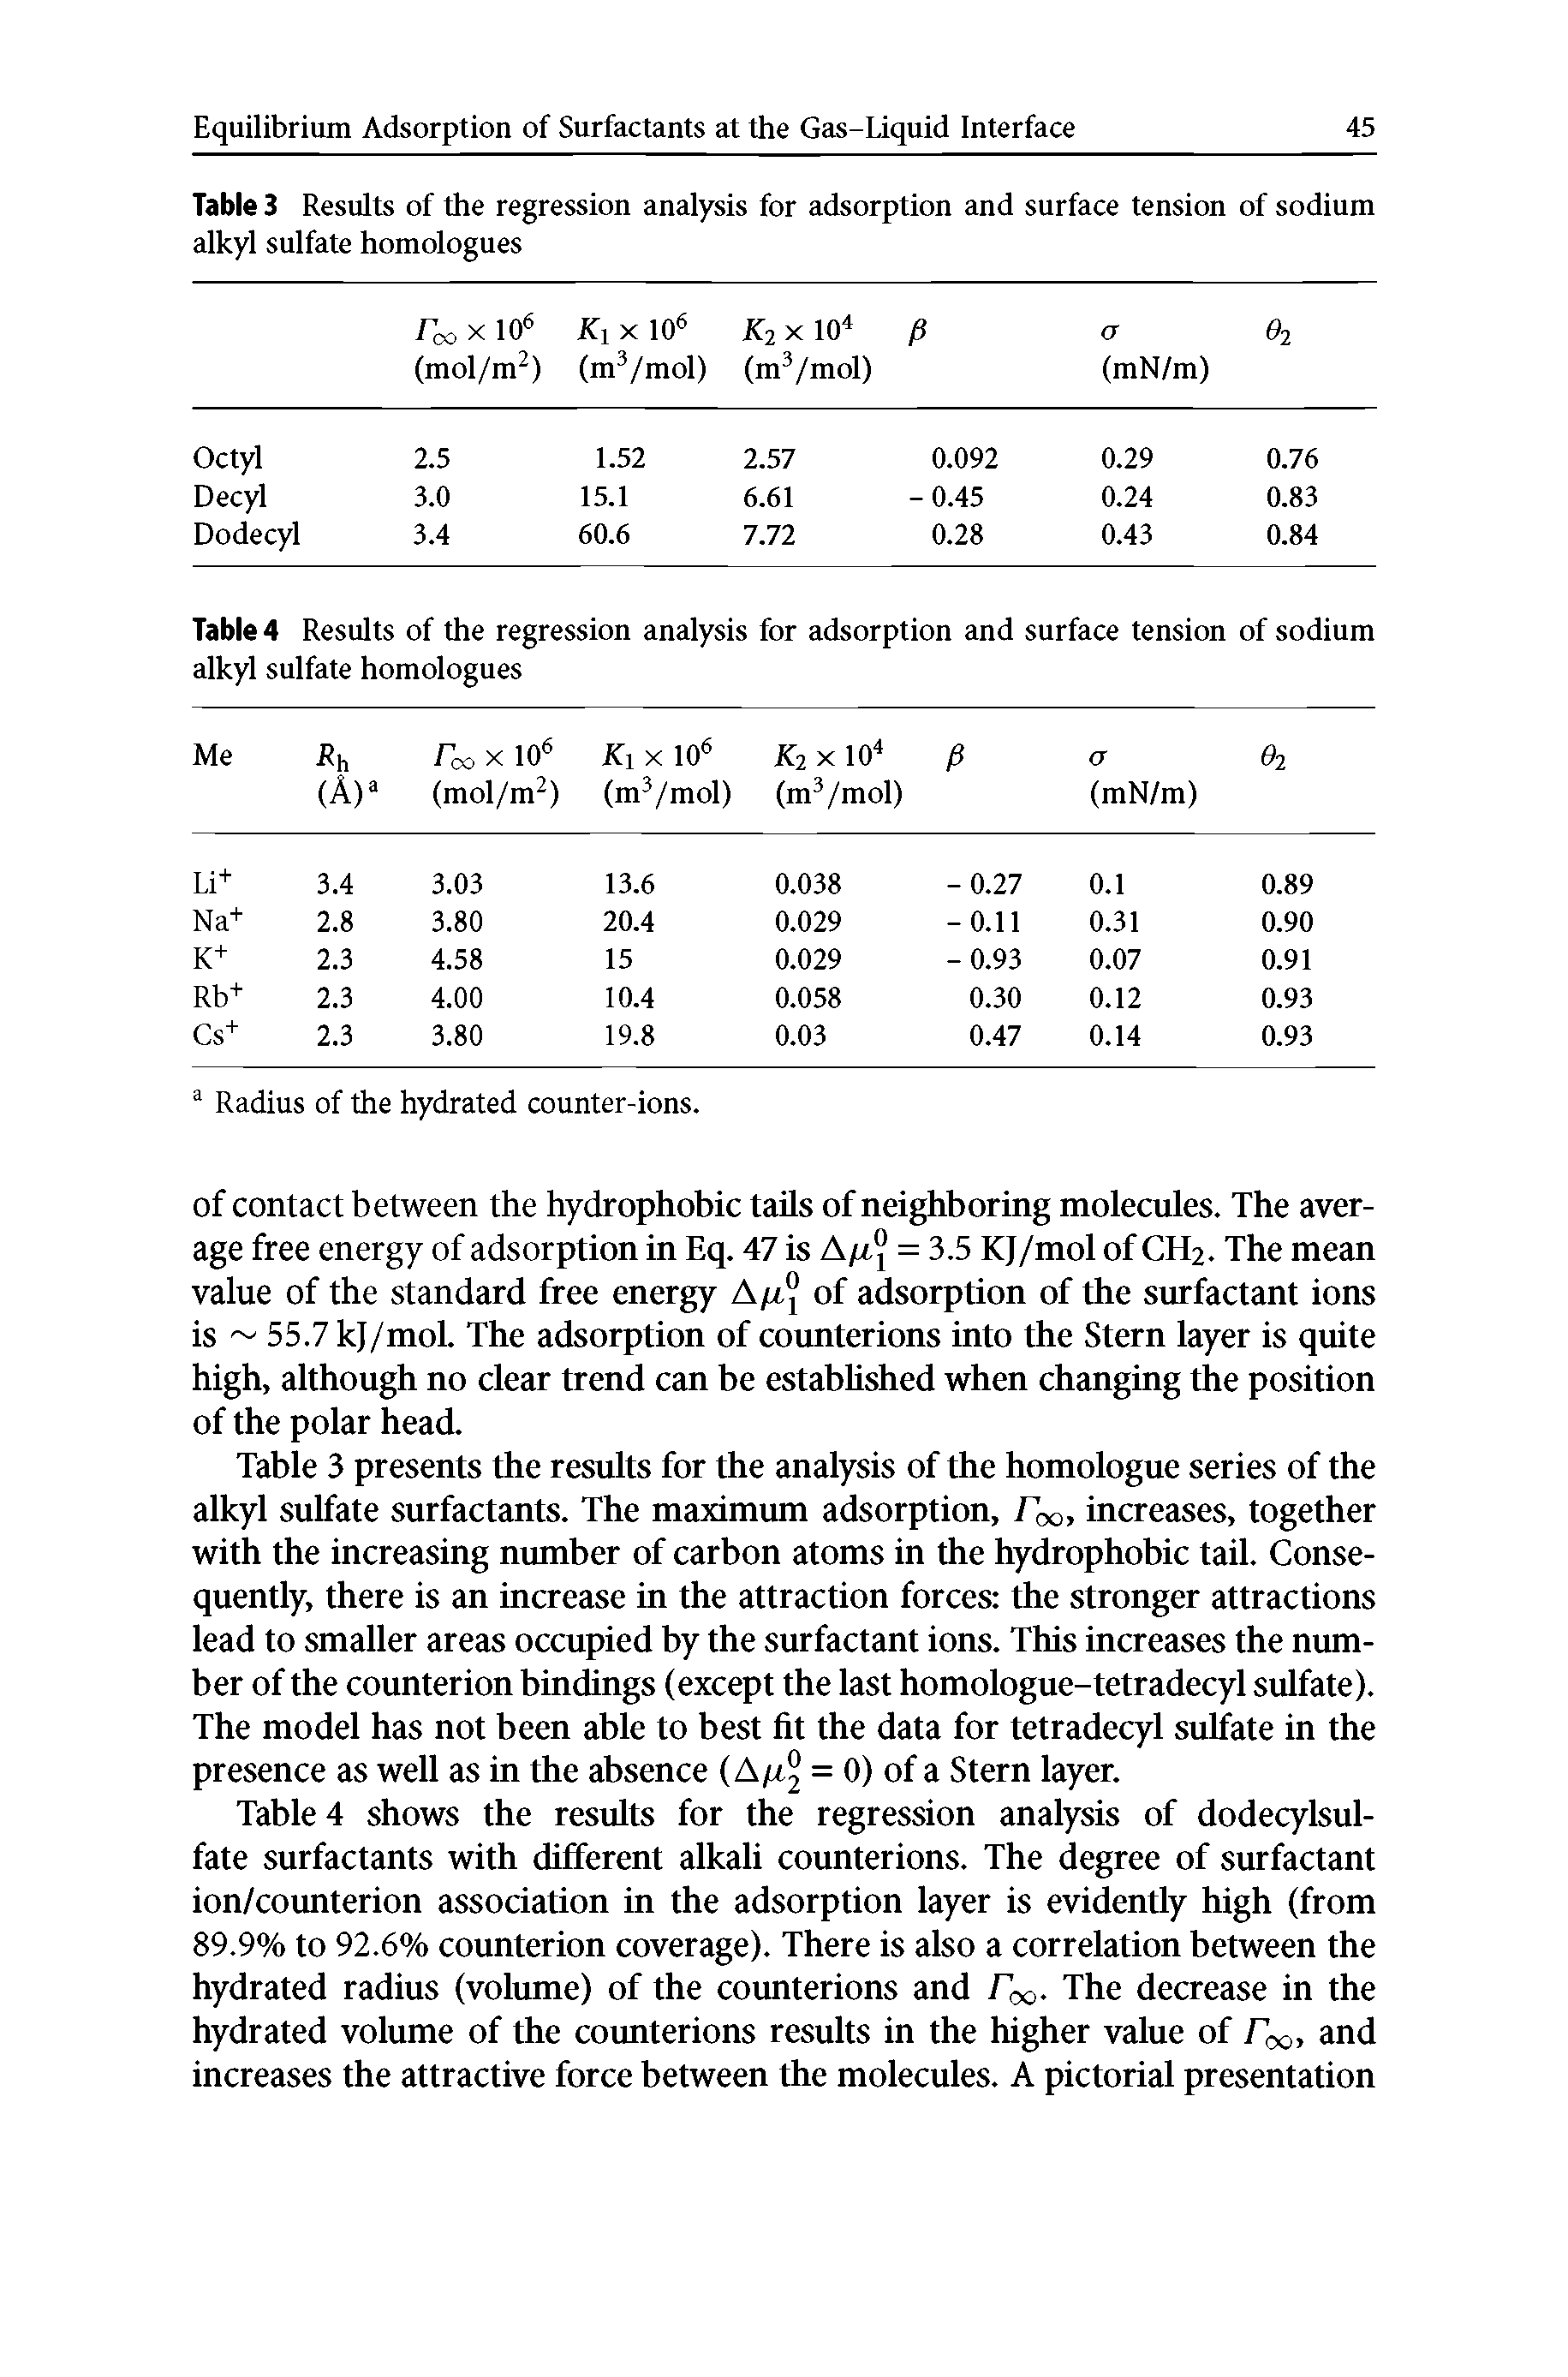 Tabled shows the results for the regression analysis of dodecylsul-fate surfactants with different alkali counterions. The degree of surfactant ion/counterion association in the adsorption layer is evidently high (from 89.9% to 92.6% counterion coverage). There is also a correlation between the hydrated radius (volume) of the counterions and Coo. The decrease in the hydrated volume of the coimterions results in the higher value of Coo, and increases the attractive force between the molecules. A pictorial presentation...